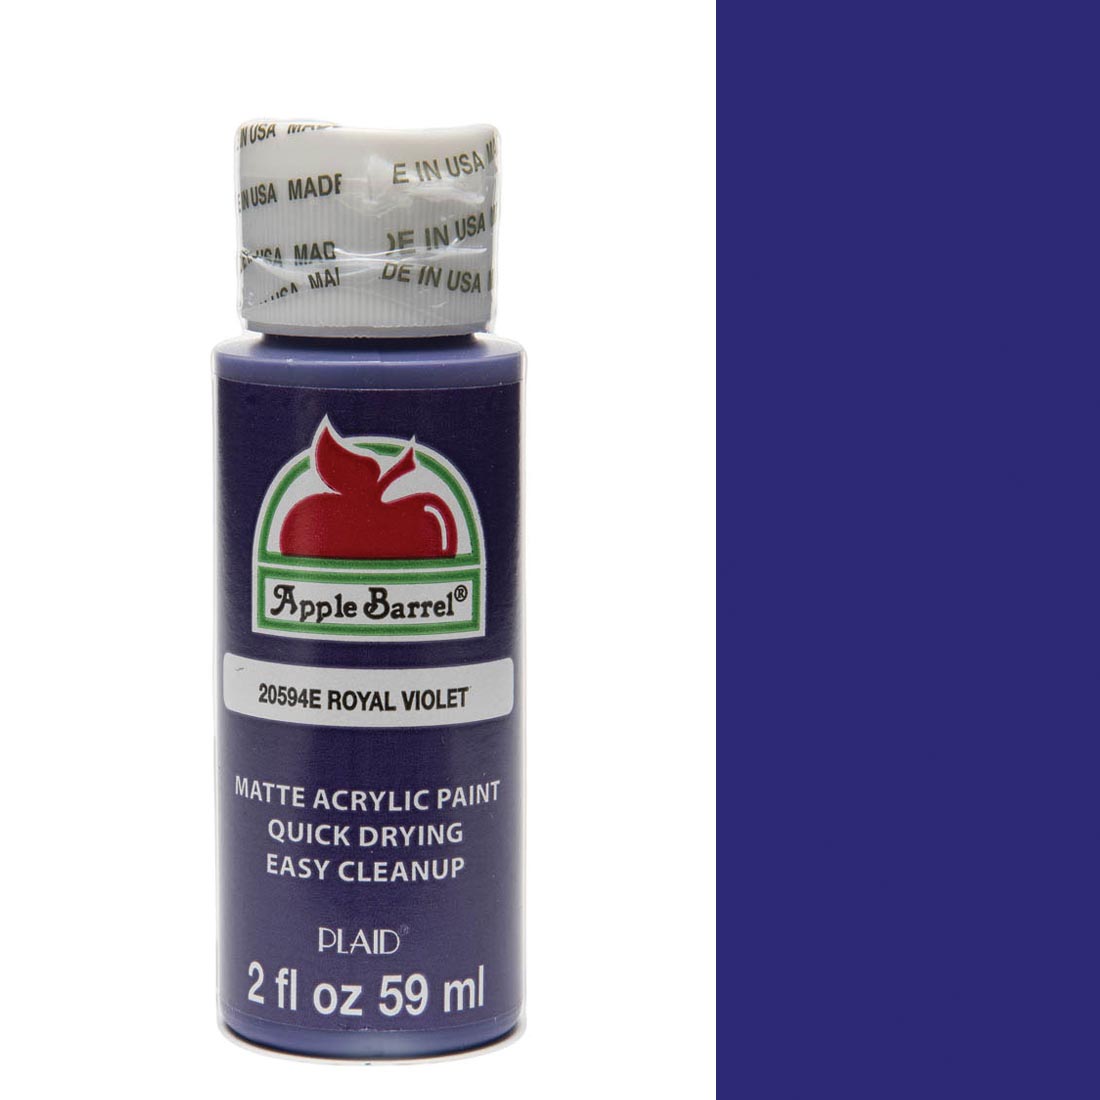 Royal Violet Apple Barrel Acrylic Craft Paint bottle next to its color swatch